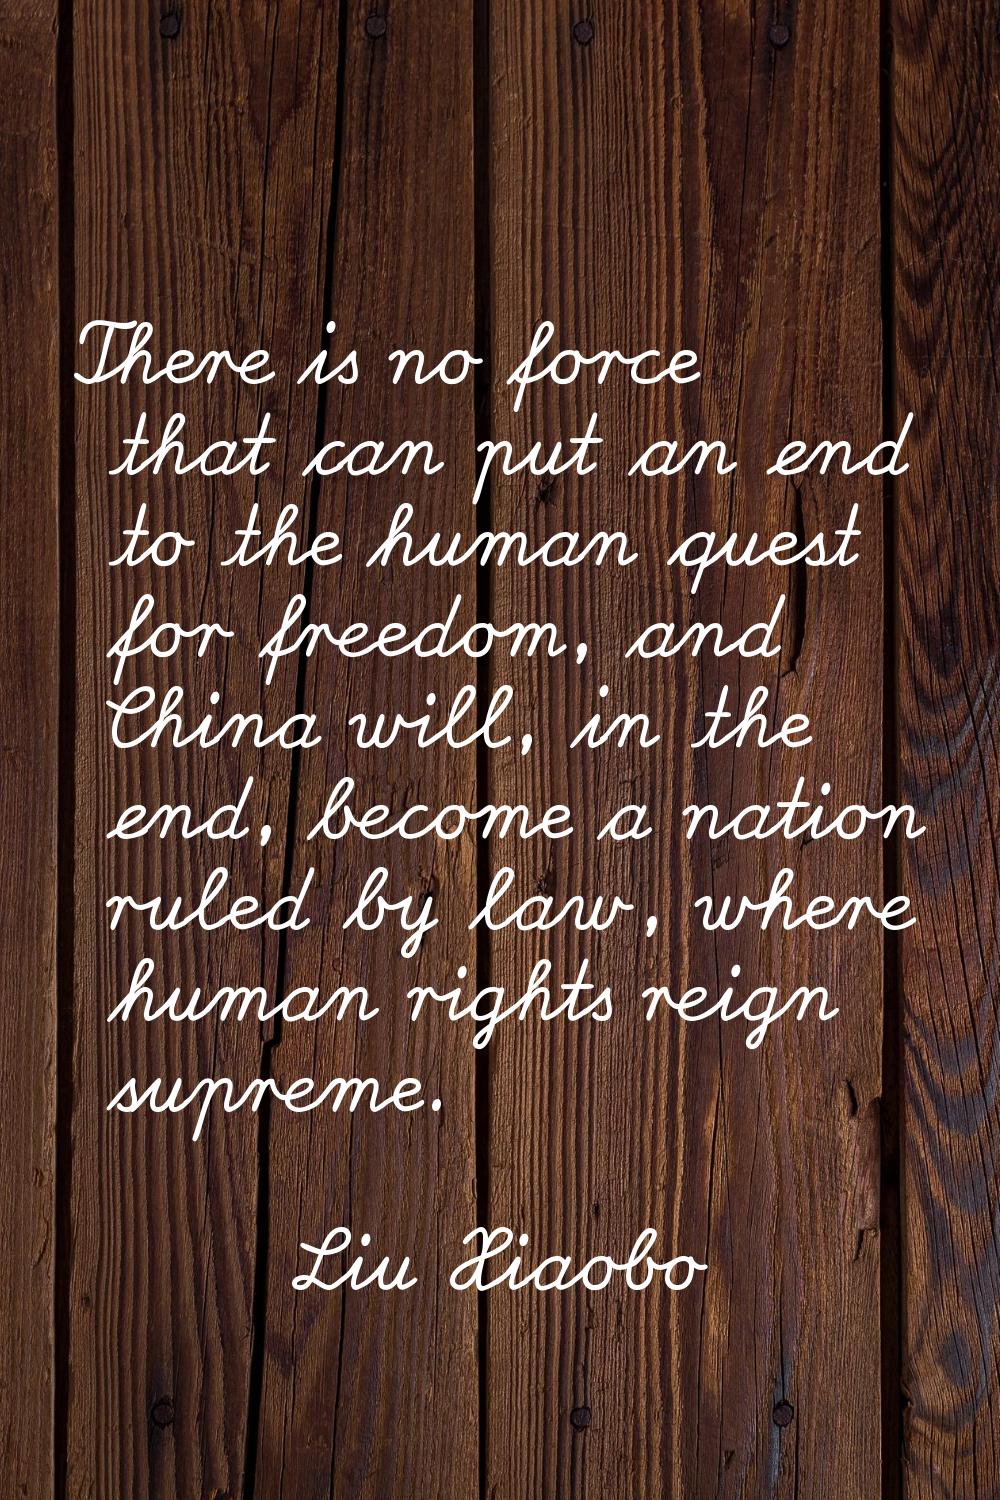 There is no force that can put an end to the human quest for freedom, and China will, in the end, b